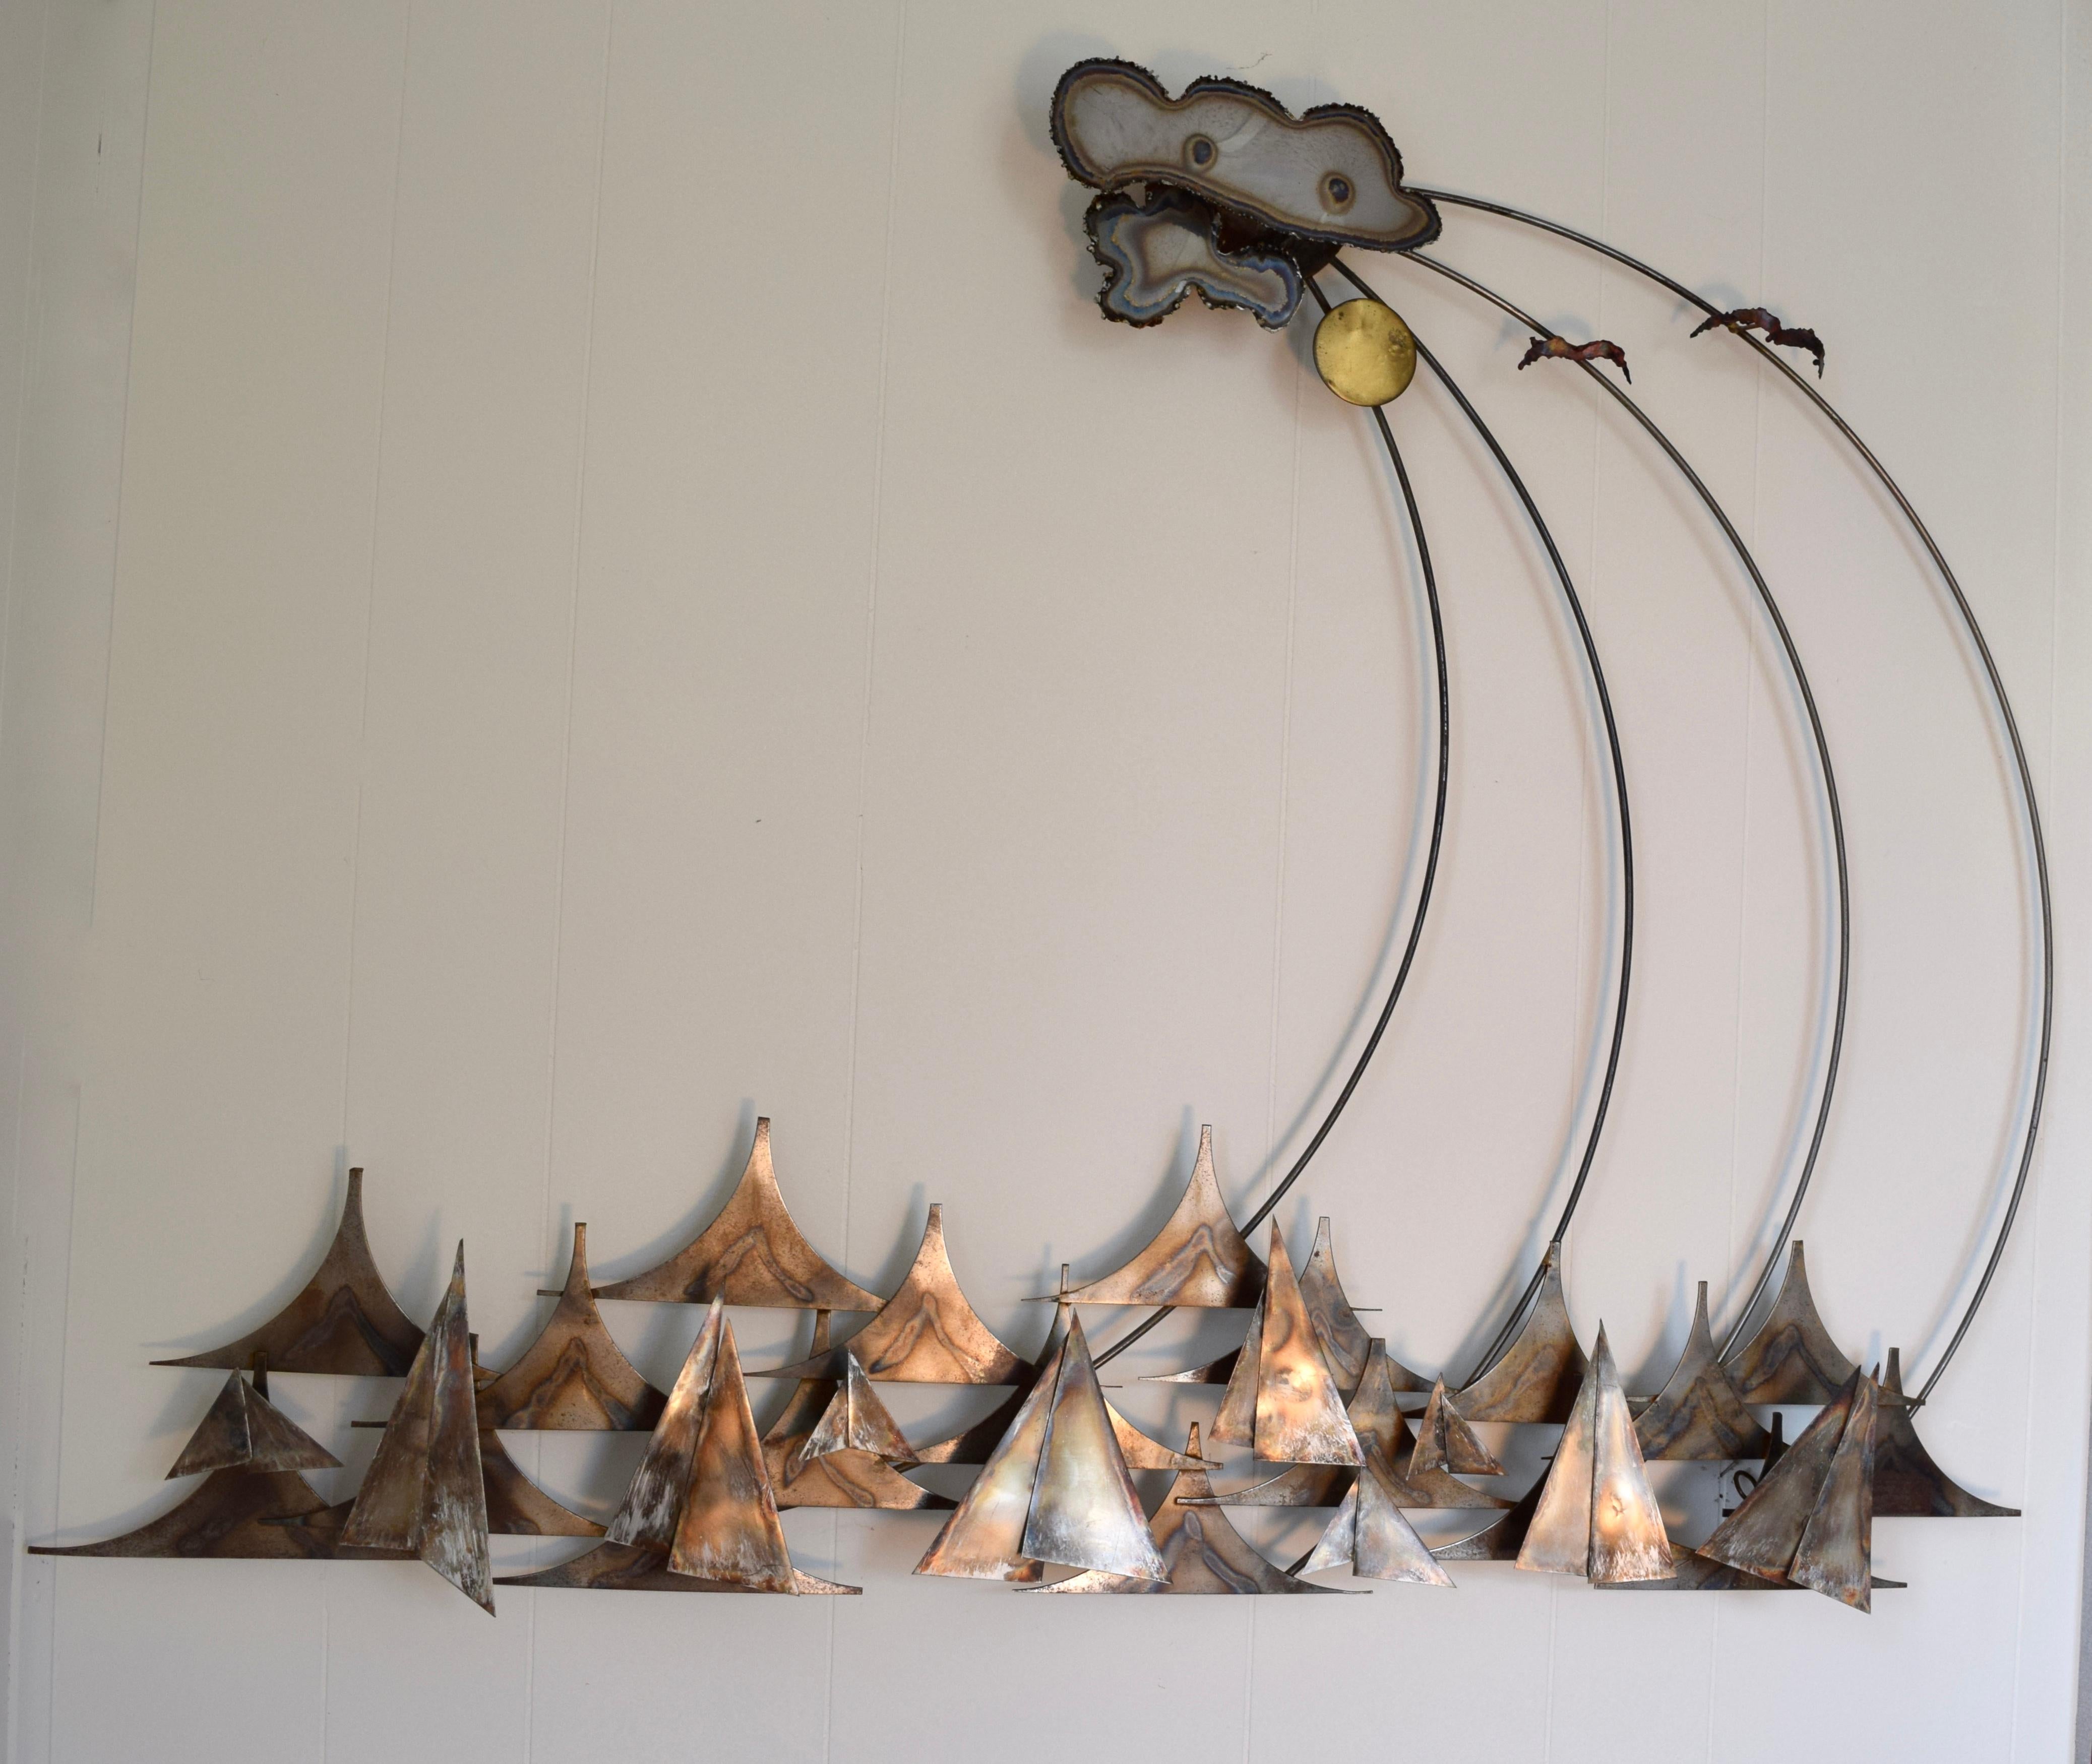 Late 20th Century A.J. Stillman Mixed Metals Hanging Wall Sculpture For Sale